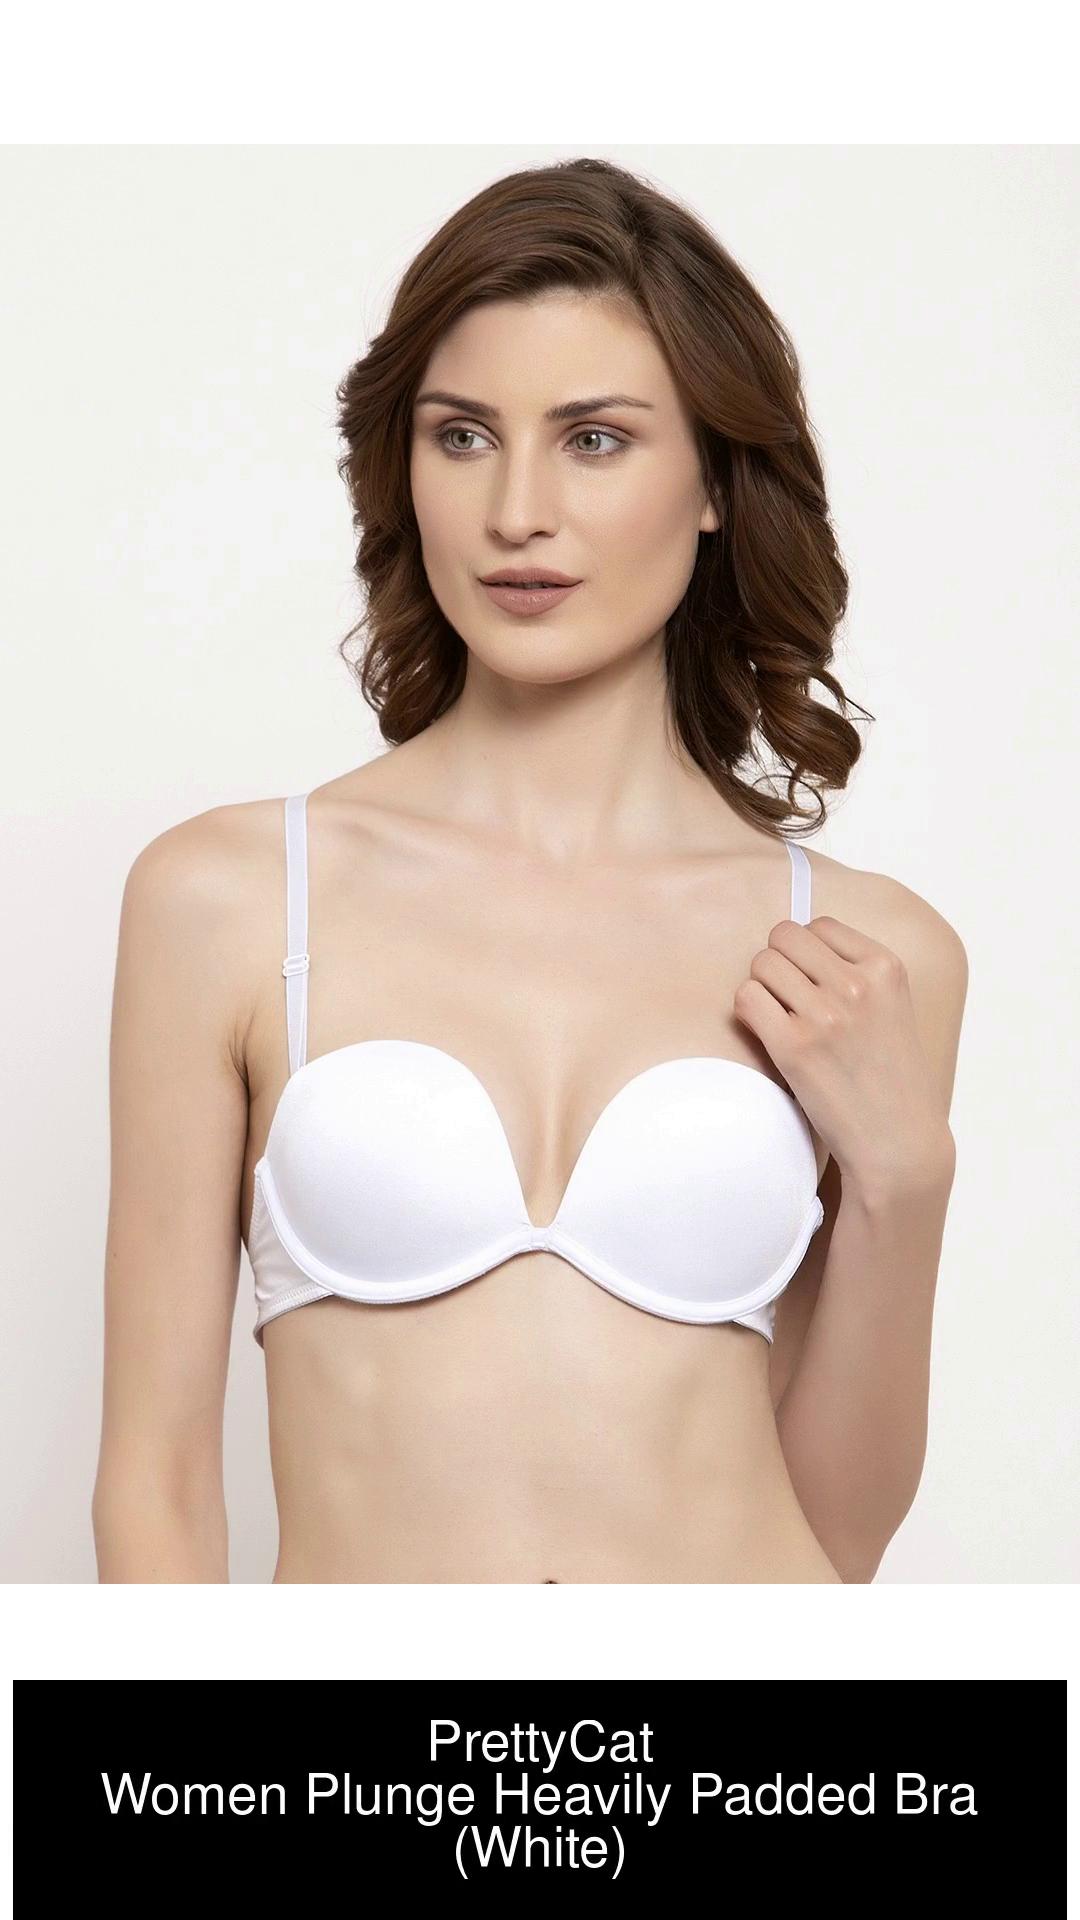 PrettyCat Women Plunge Heavily Padded Bra - Buy PrettyCat Women Plunge Heavily  Padded Bra Online at Best Prices in India